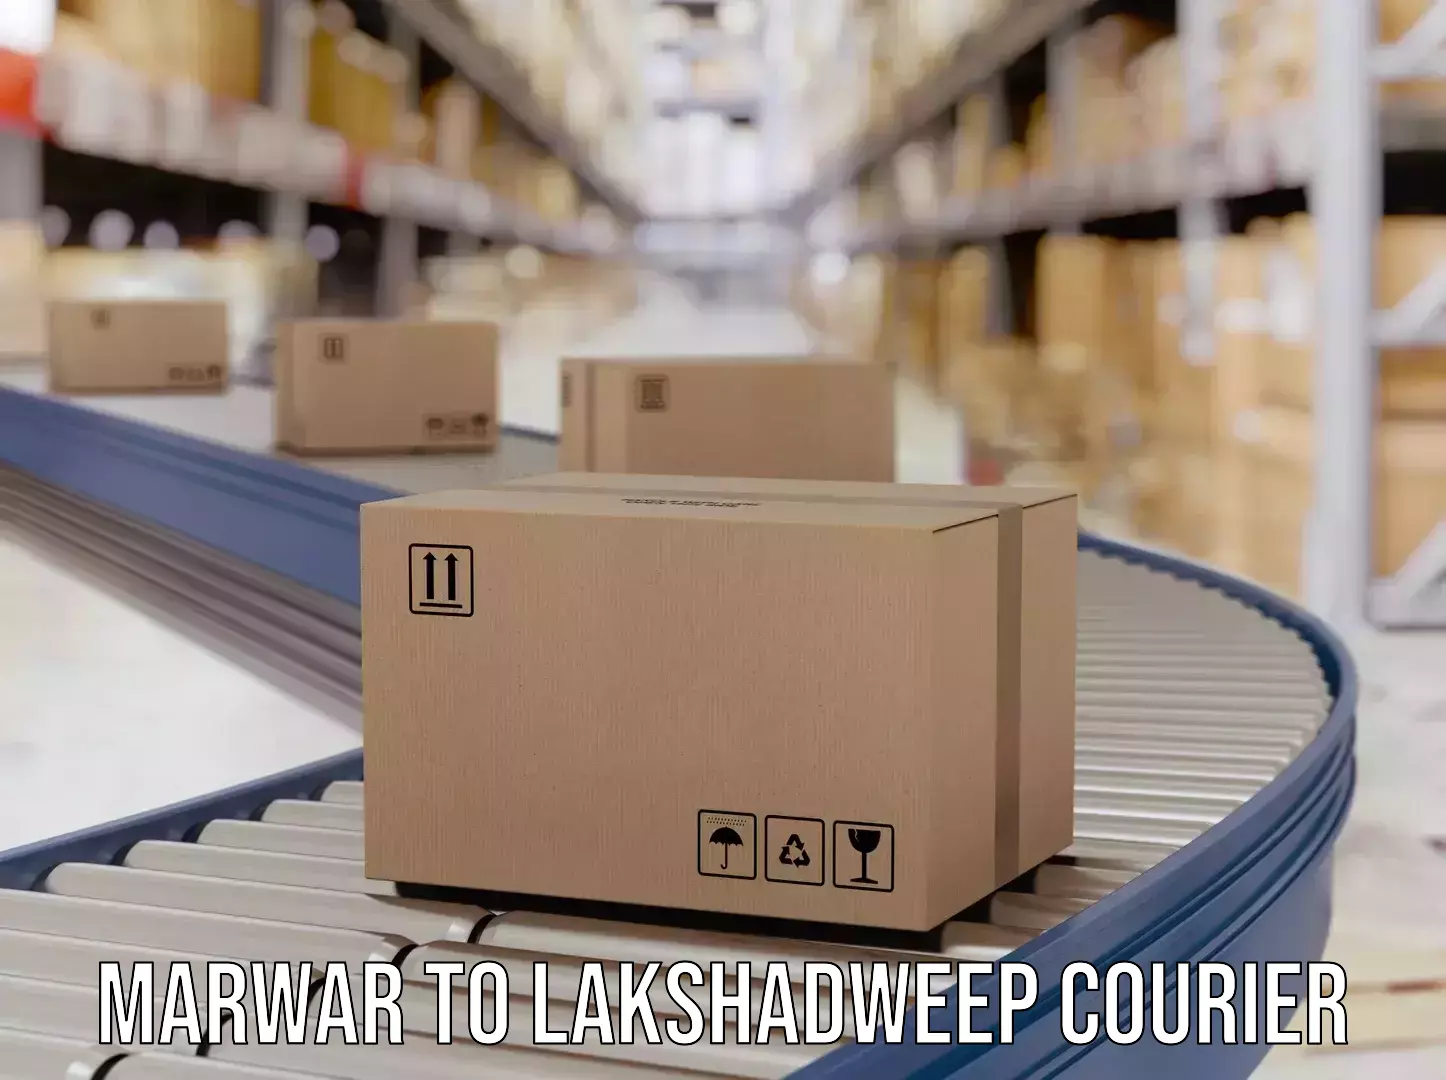 User-friendly delivery service Marwar to Lakshadweep